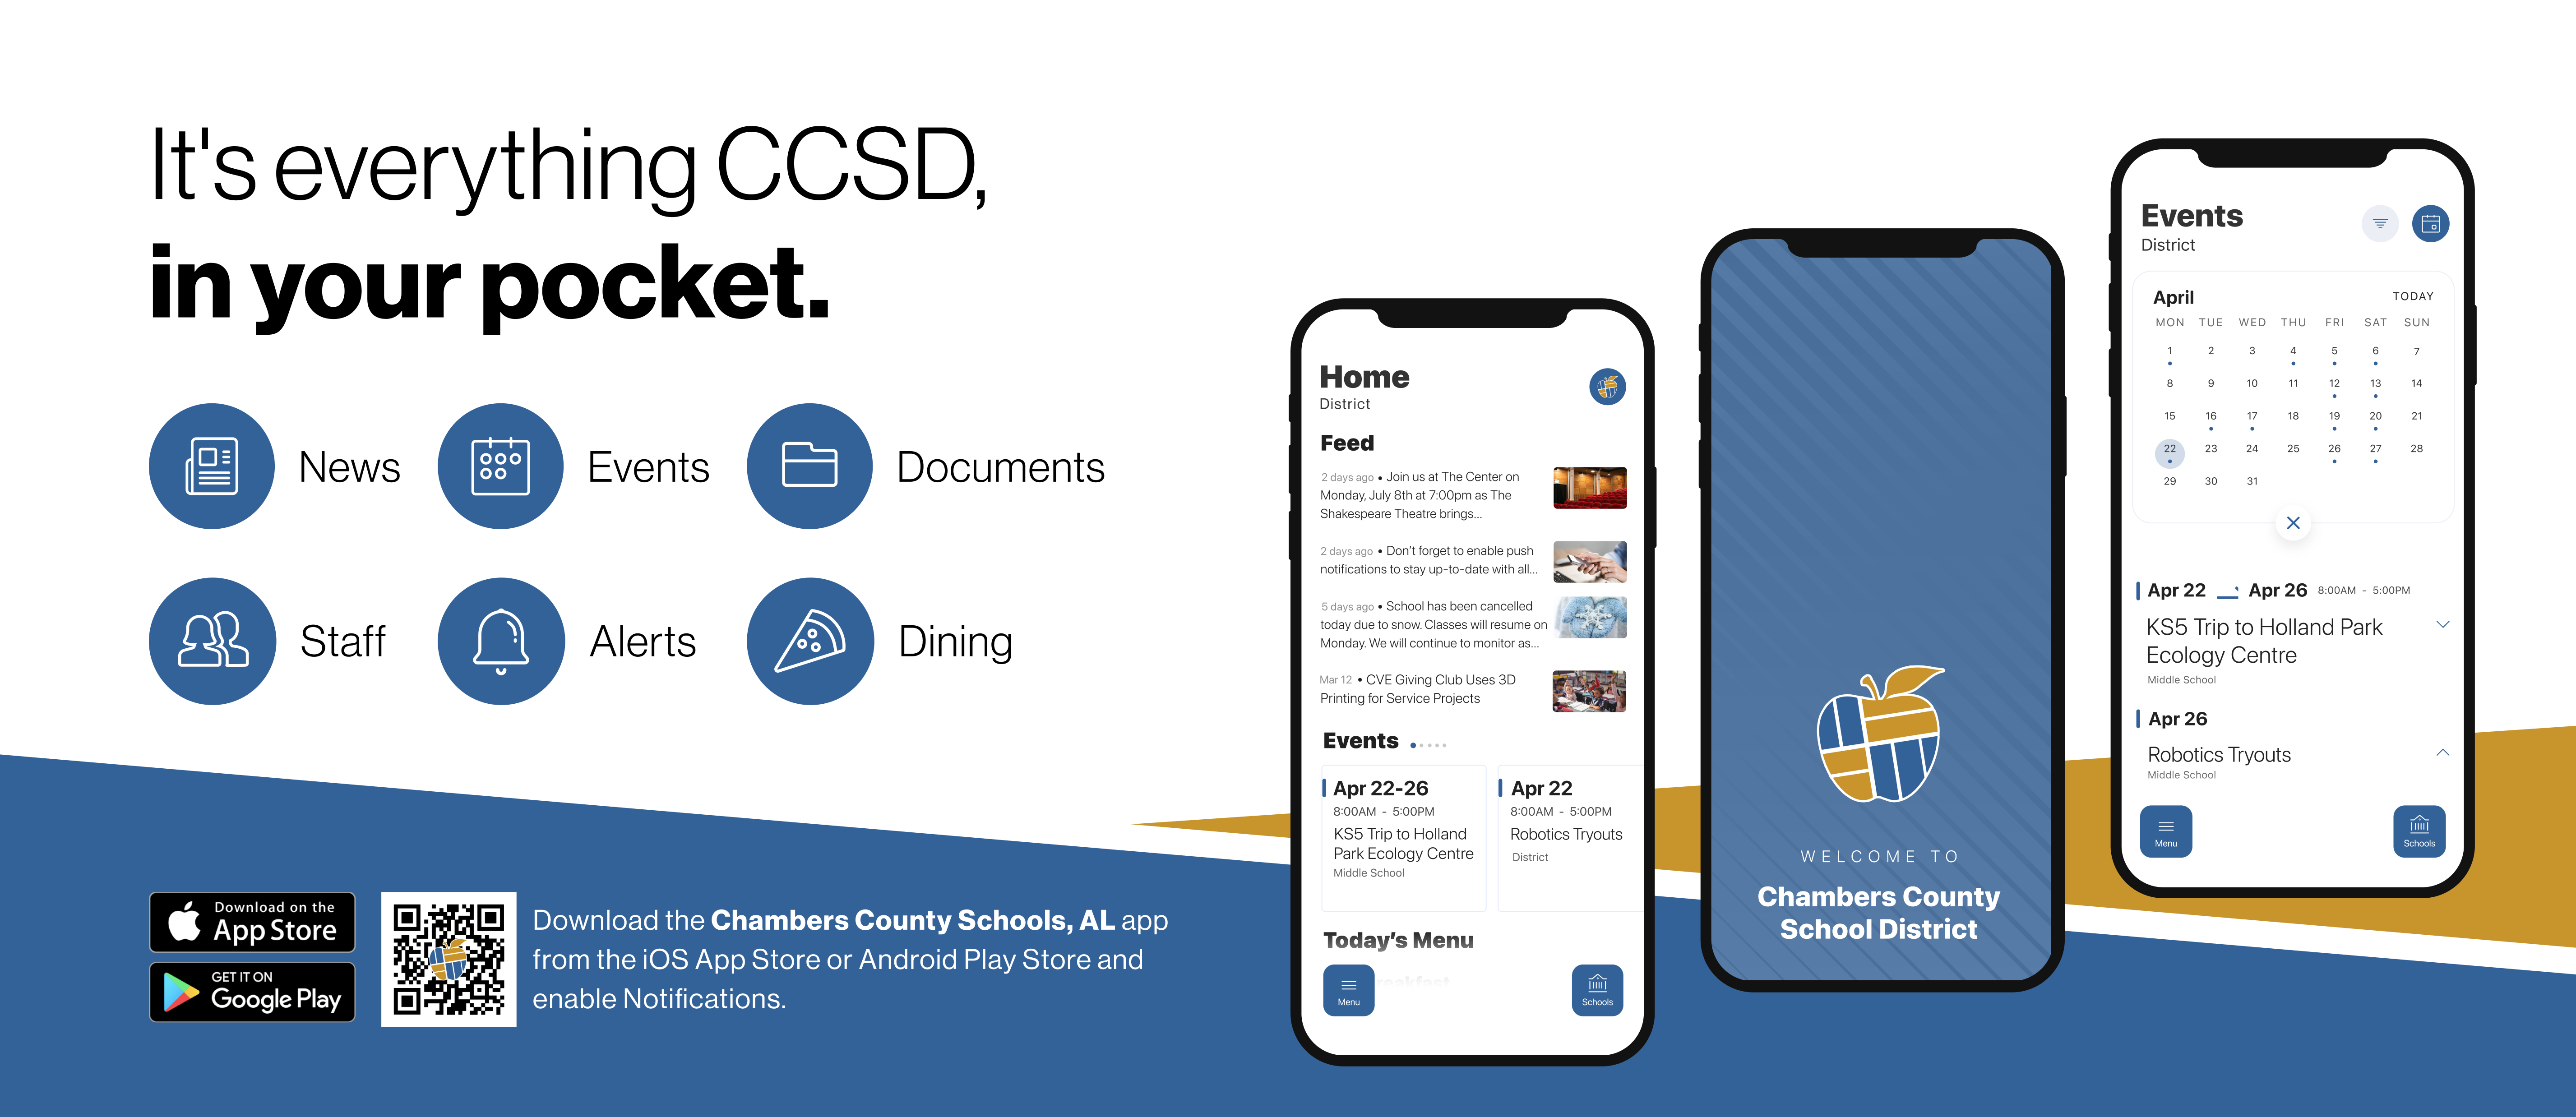 information on the new CCSD app with a QR code in the lower left and the text "It's everything CCSD, in your pocket"